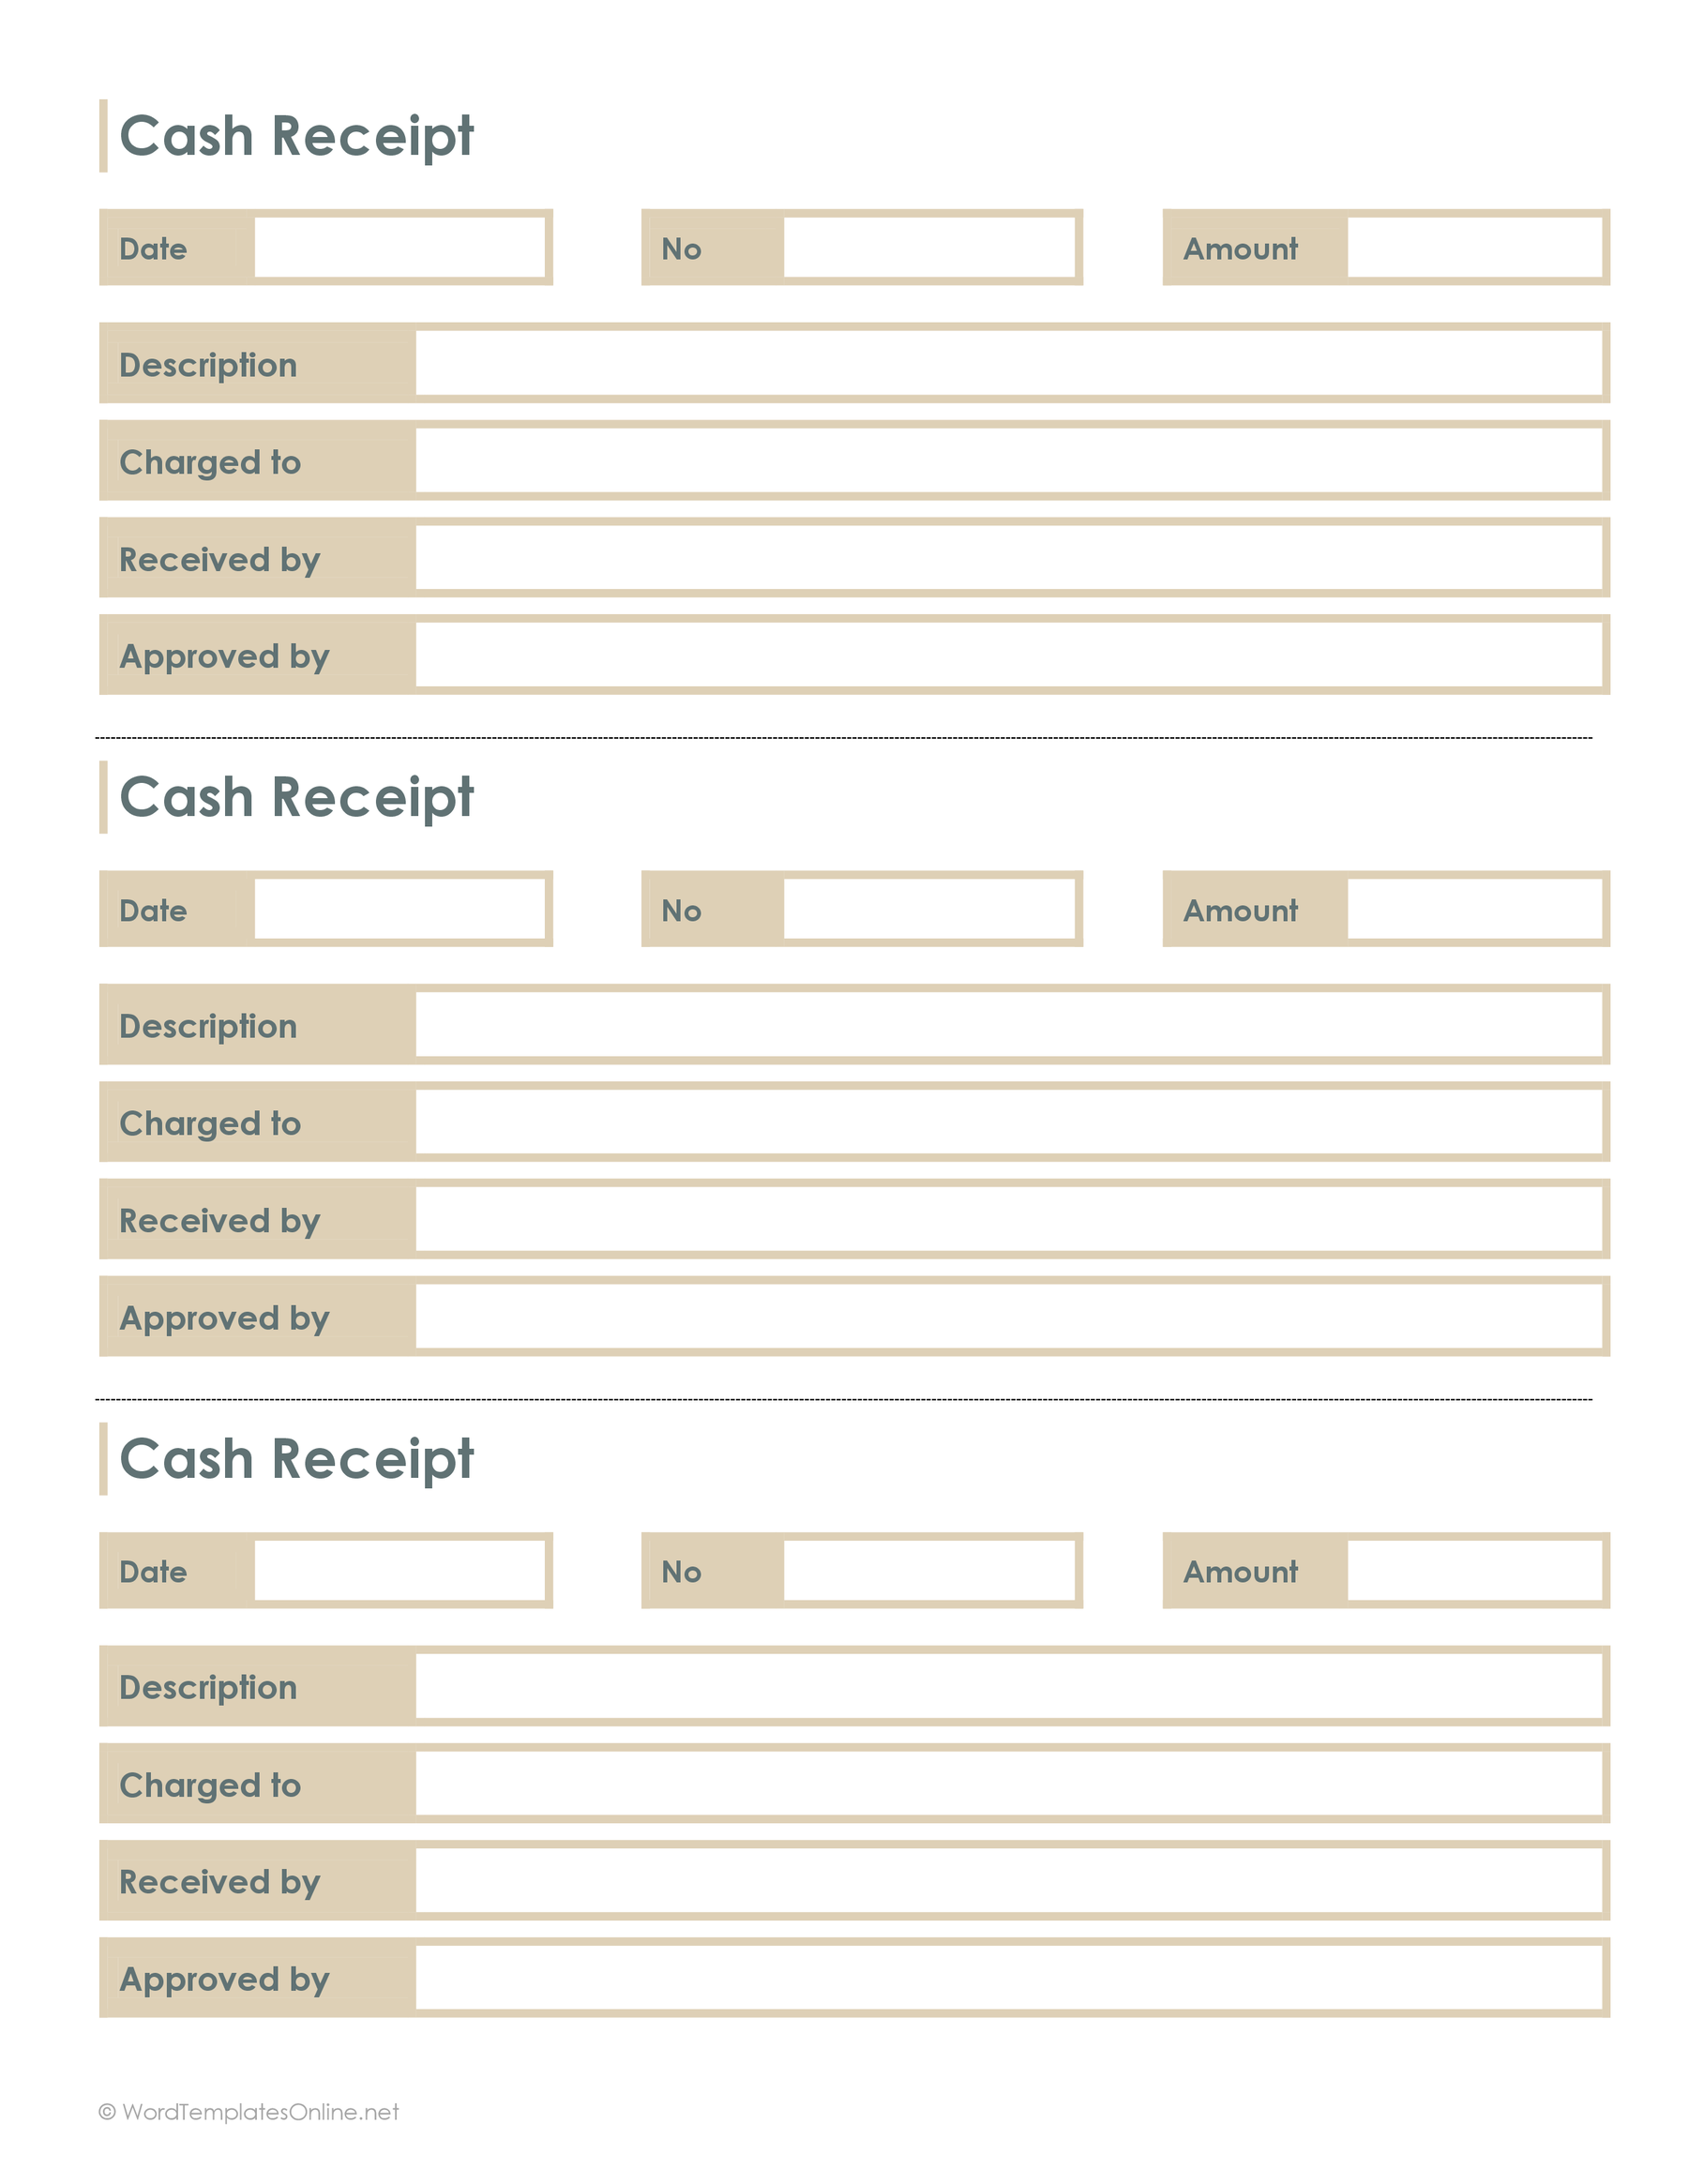 microsoft word payment receipt template